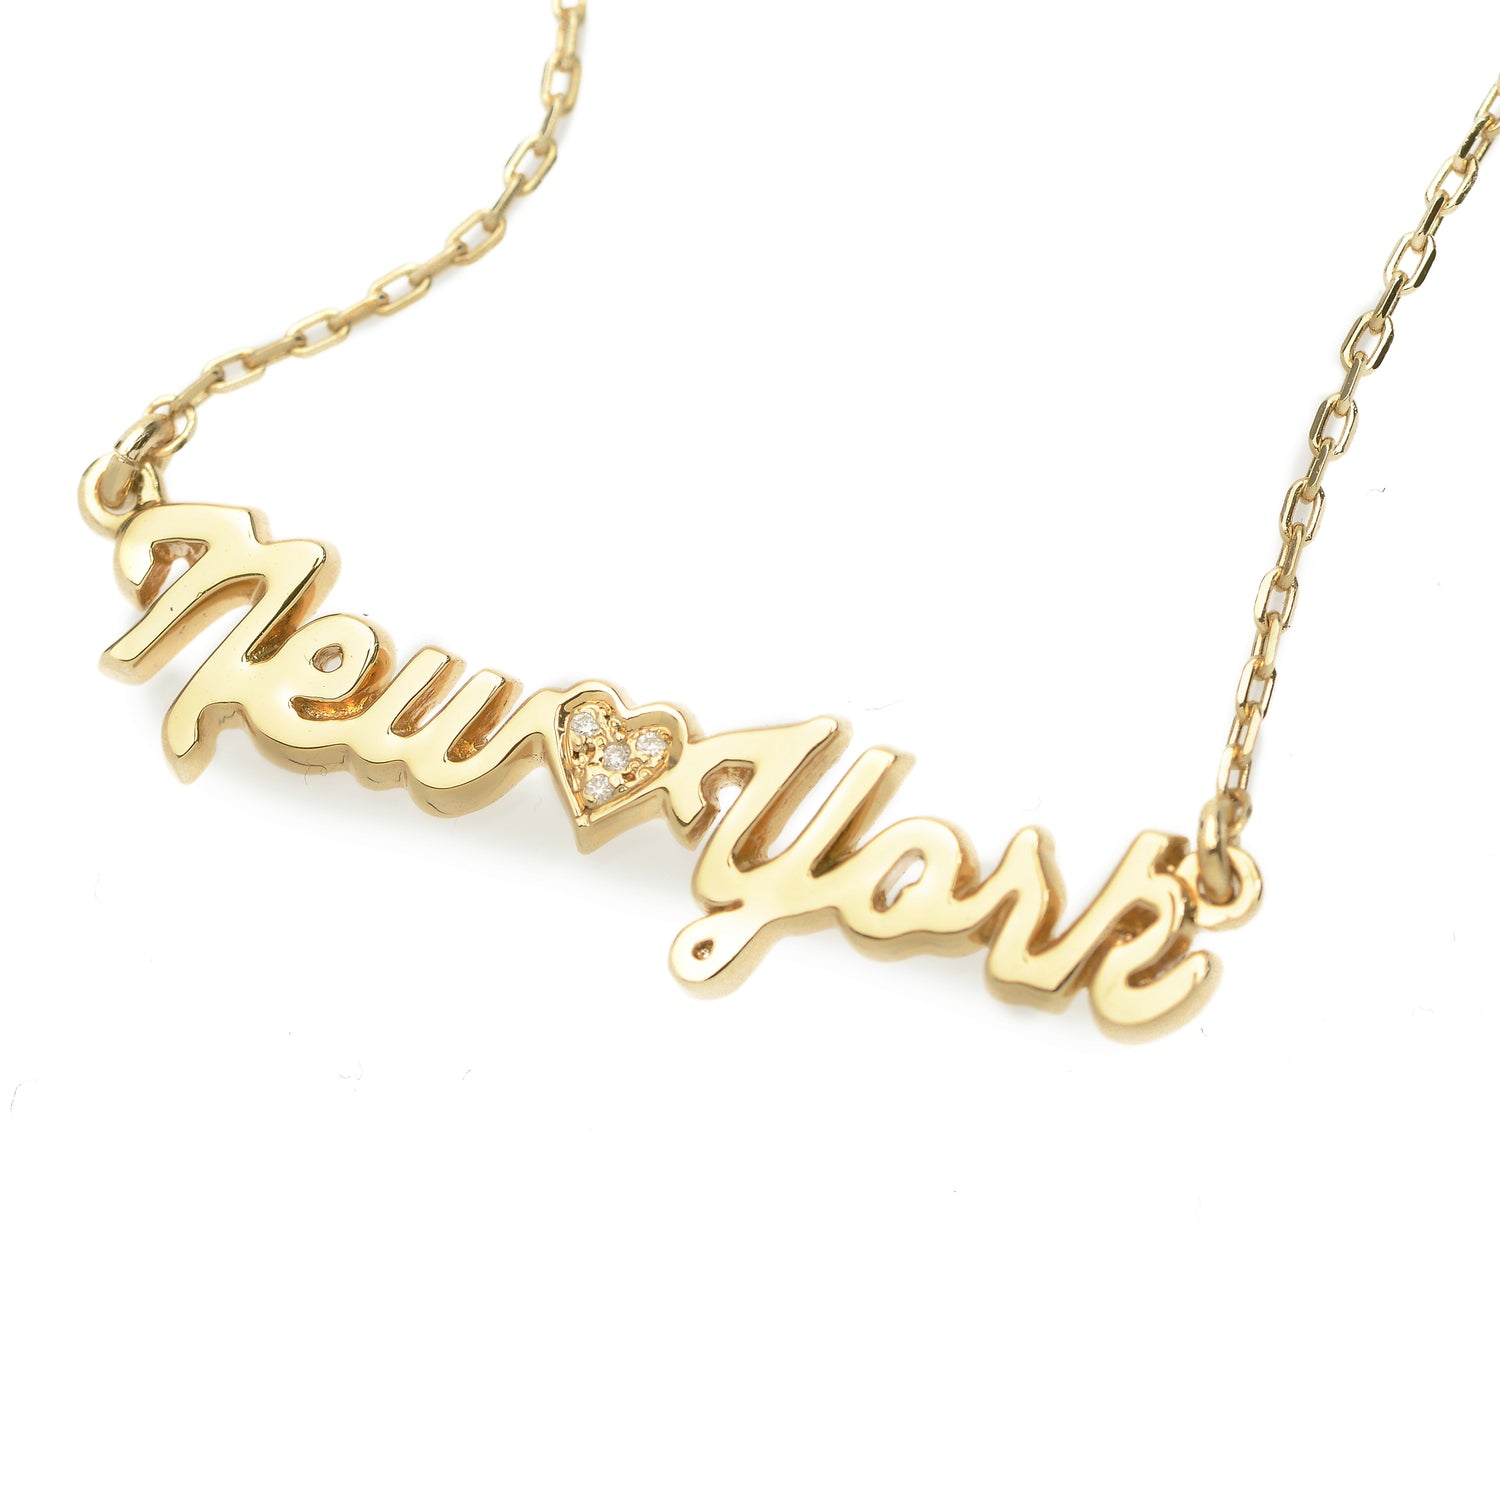 New York Necklace - Bing Bang Jewelry NYC